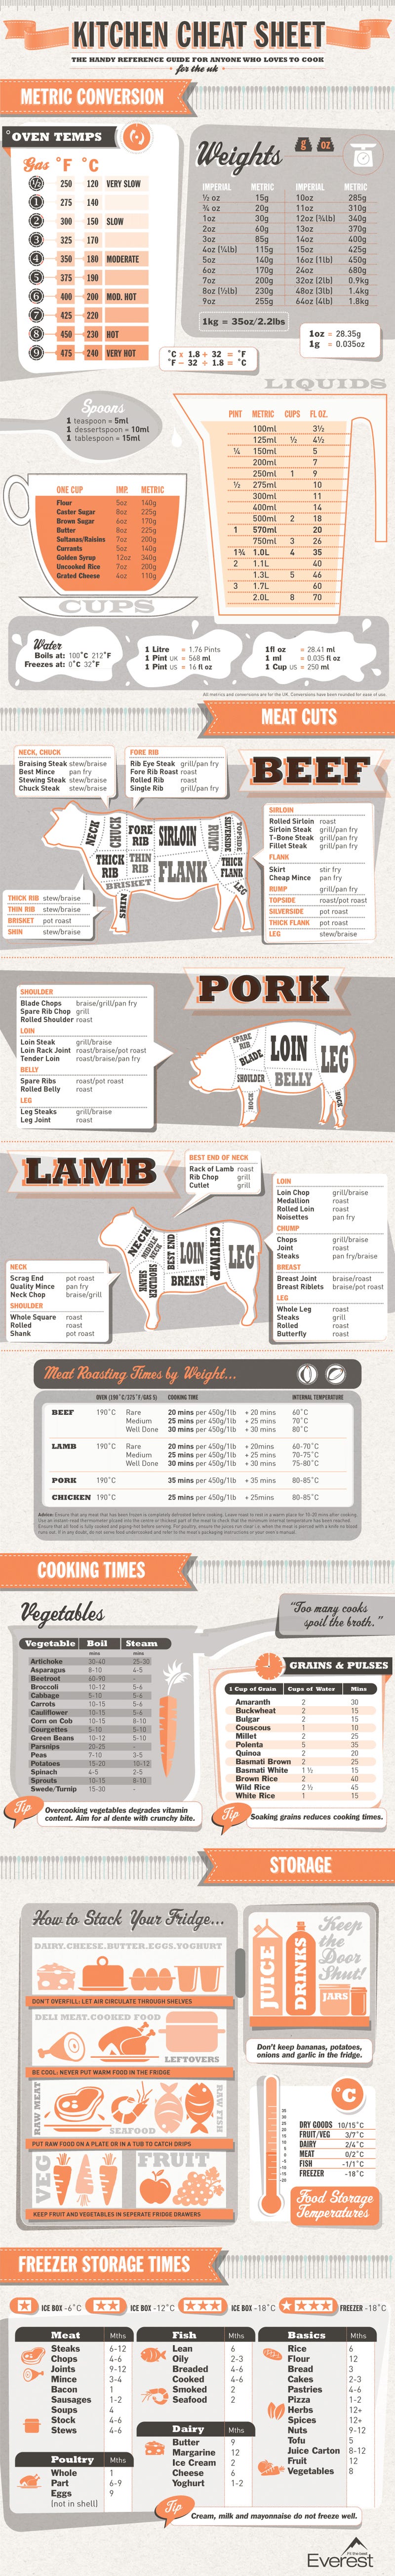 This Kitchen Cheat Sheet Has Weights Measures Cuts Of Meat And More